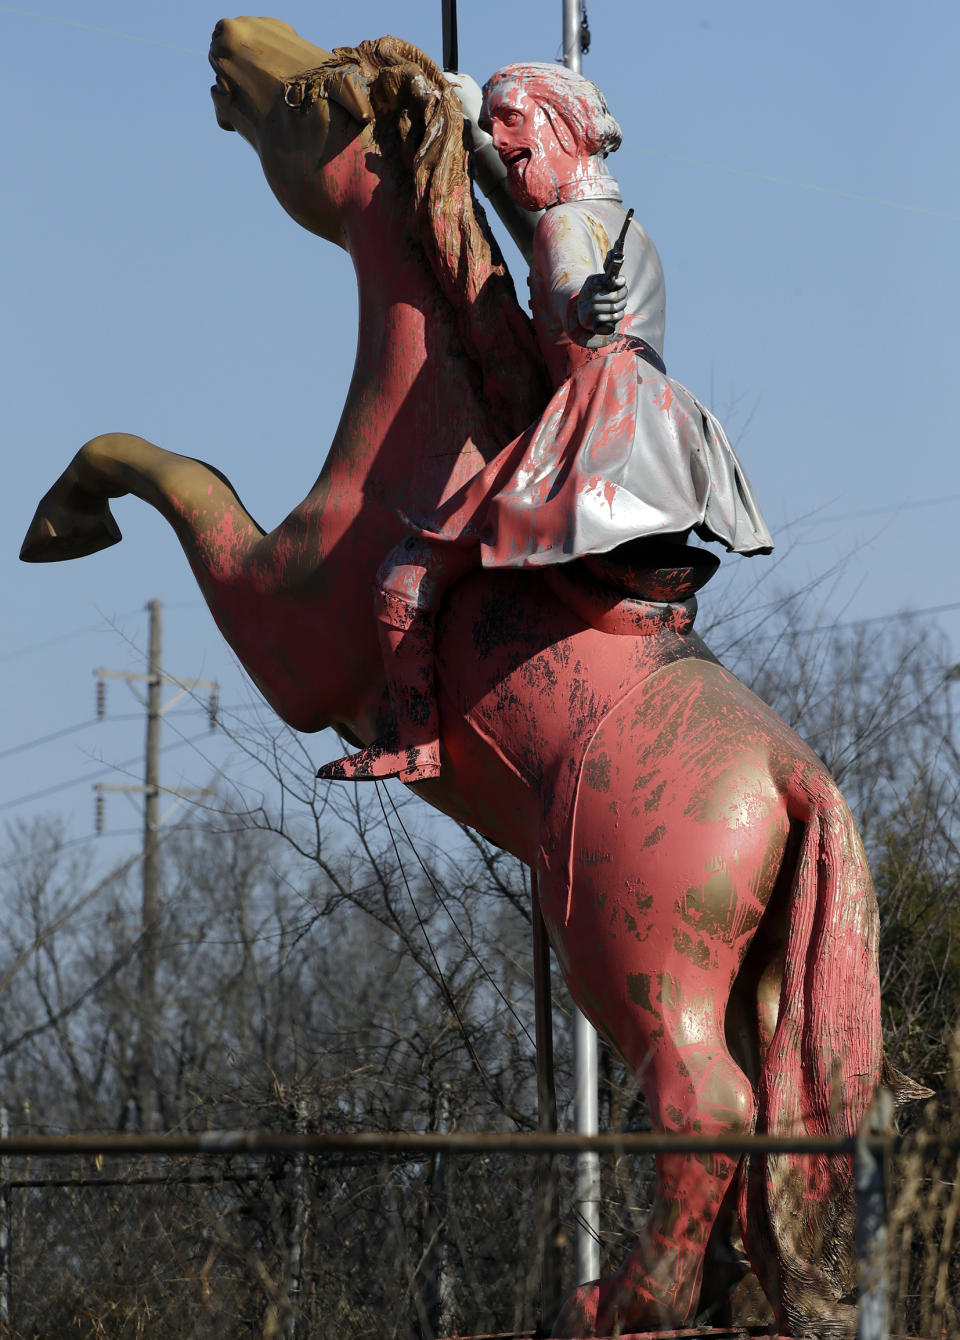 A statue of Nathan Bedford Forrest, a Confederate Army general and the first grand wizard of the Ku Klux Klan, is splattered with pink paint in Nashville, Tenn., on Dec. 28, 2017. (Mark Humphrey / AP file)